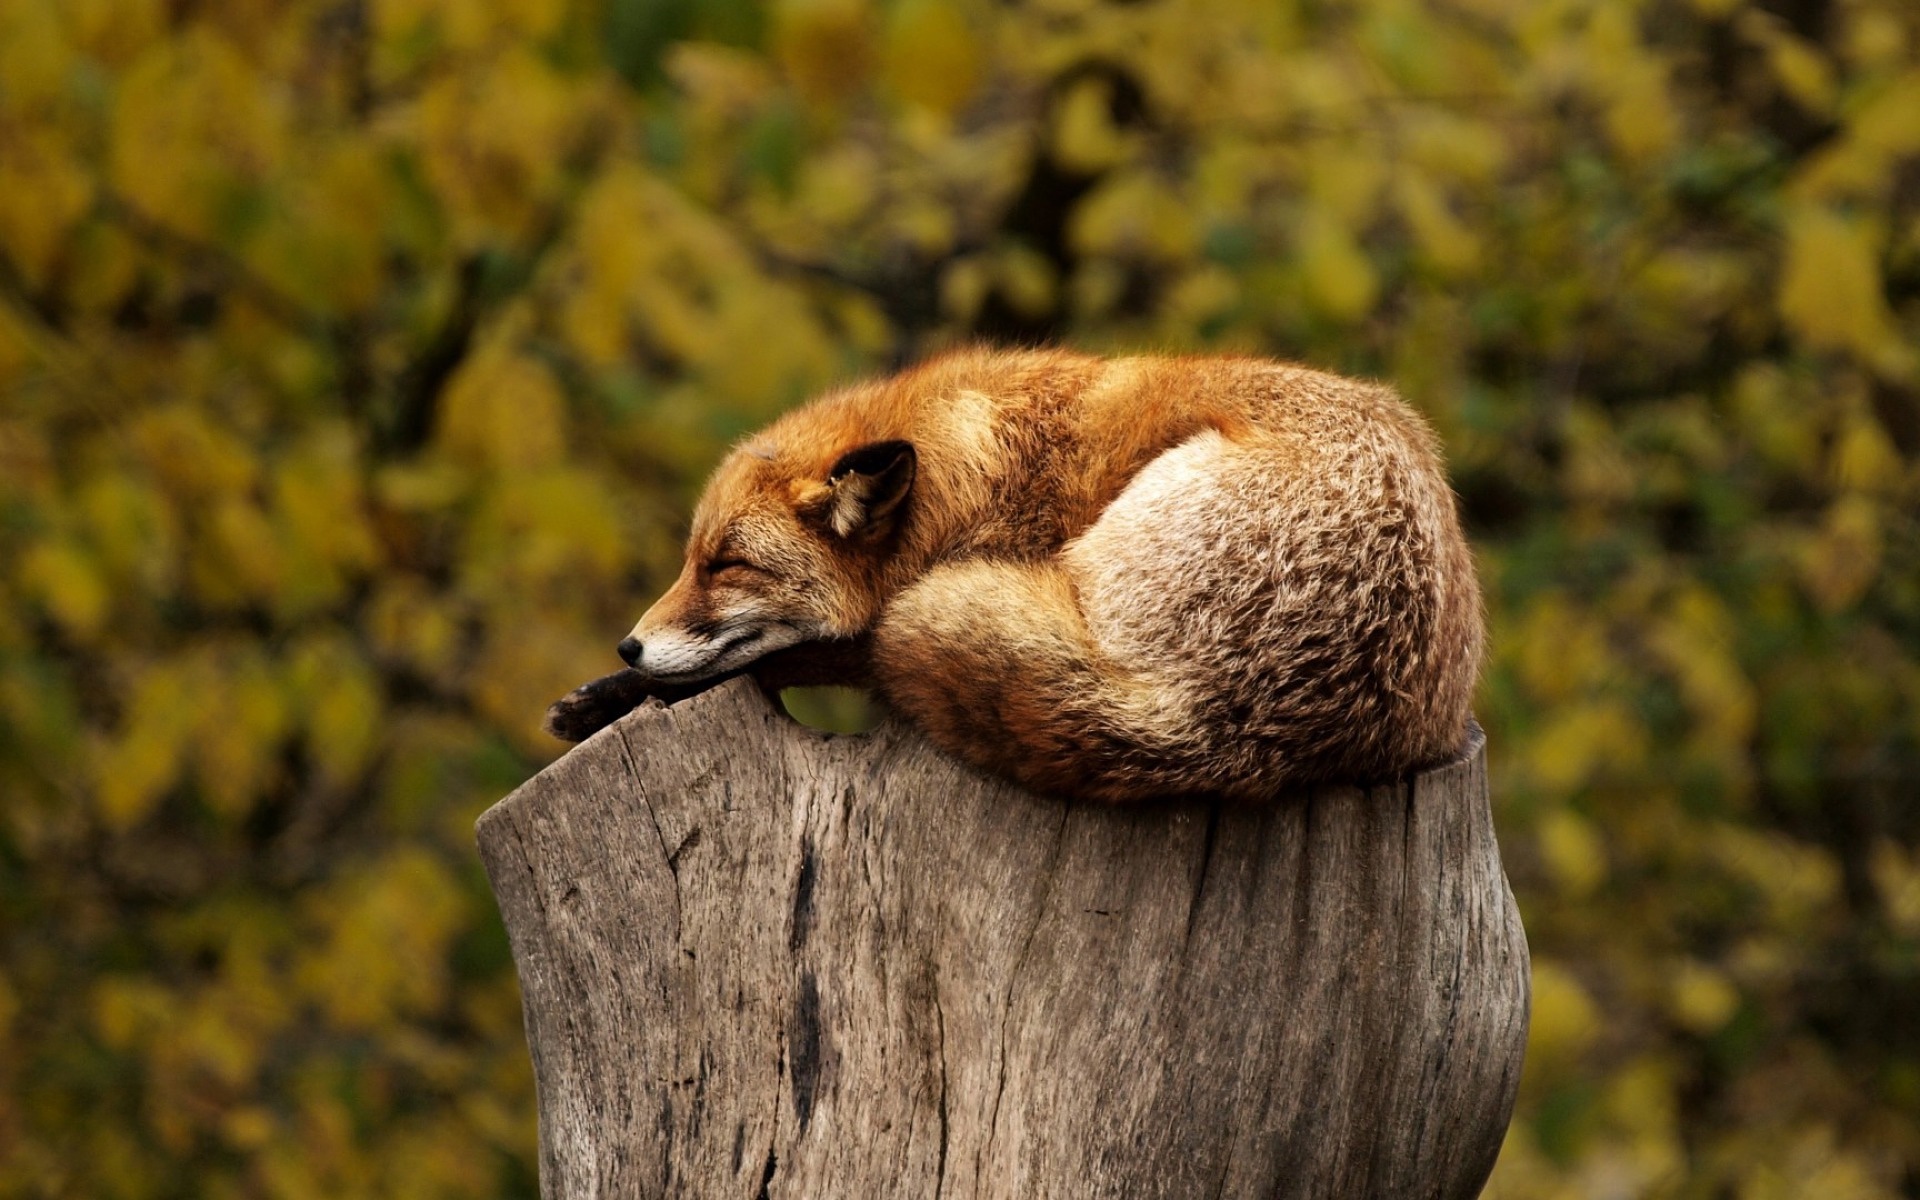 Red Fox Resting, enjoying search results being hand-crafted for him.